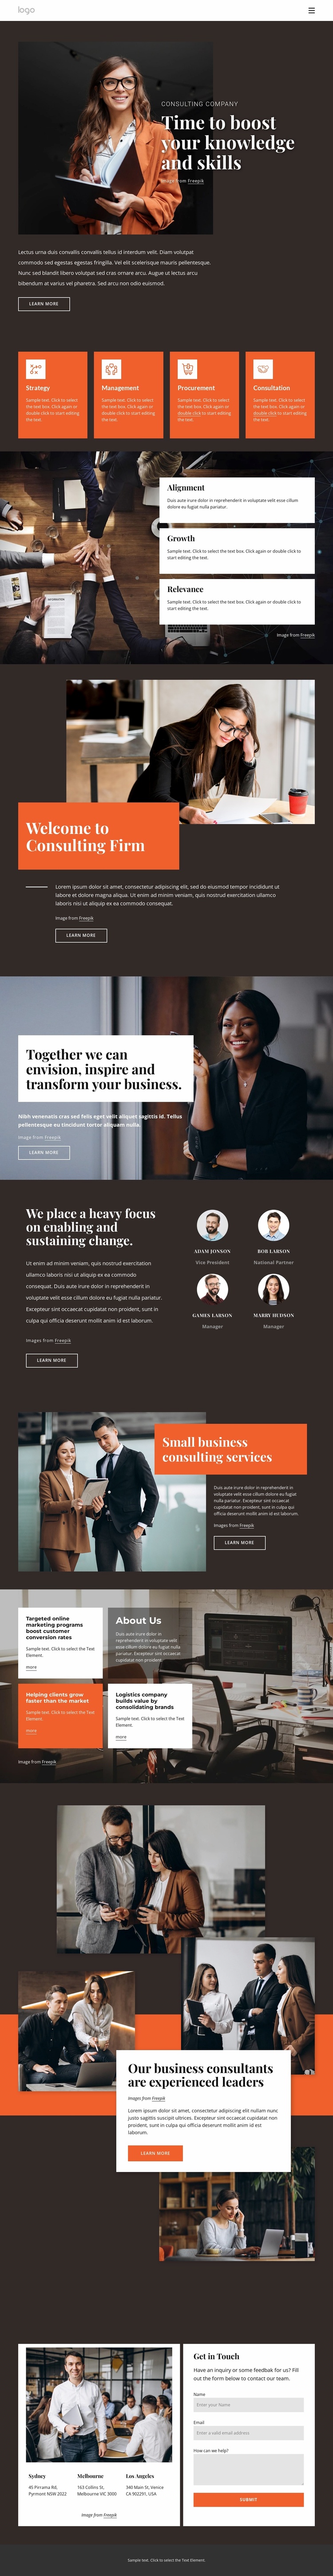 Рlan out your learning journey Website Template